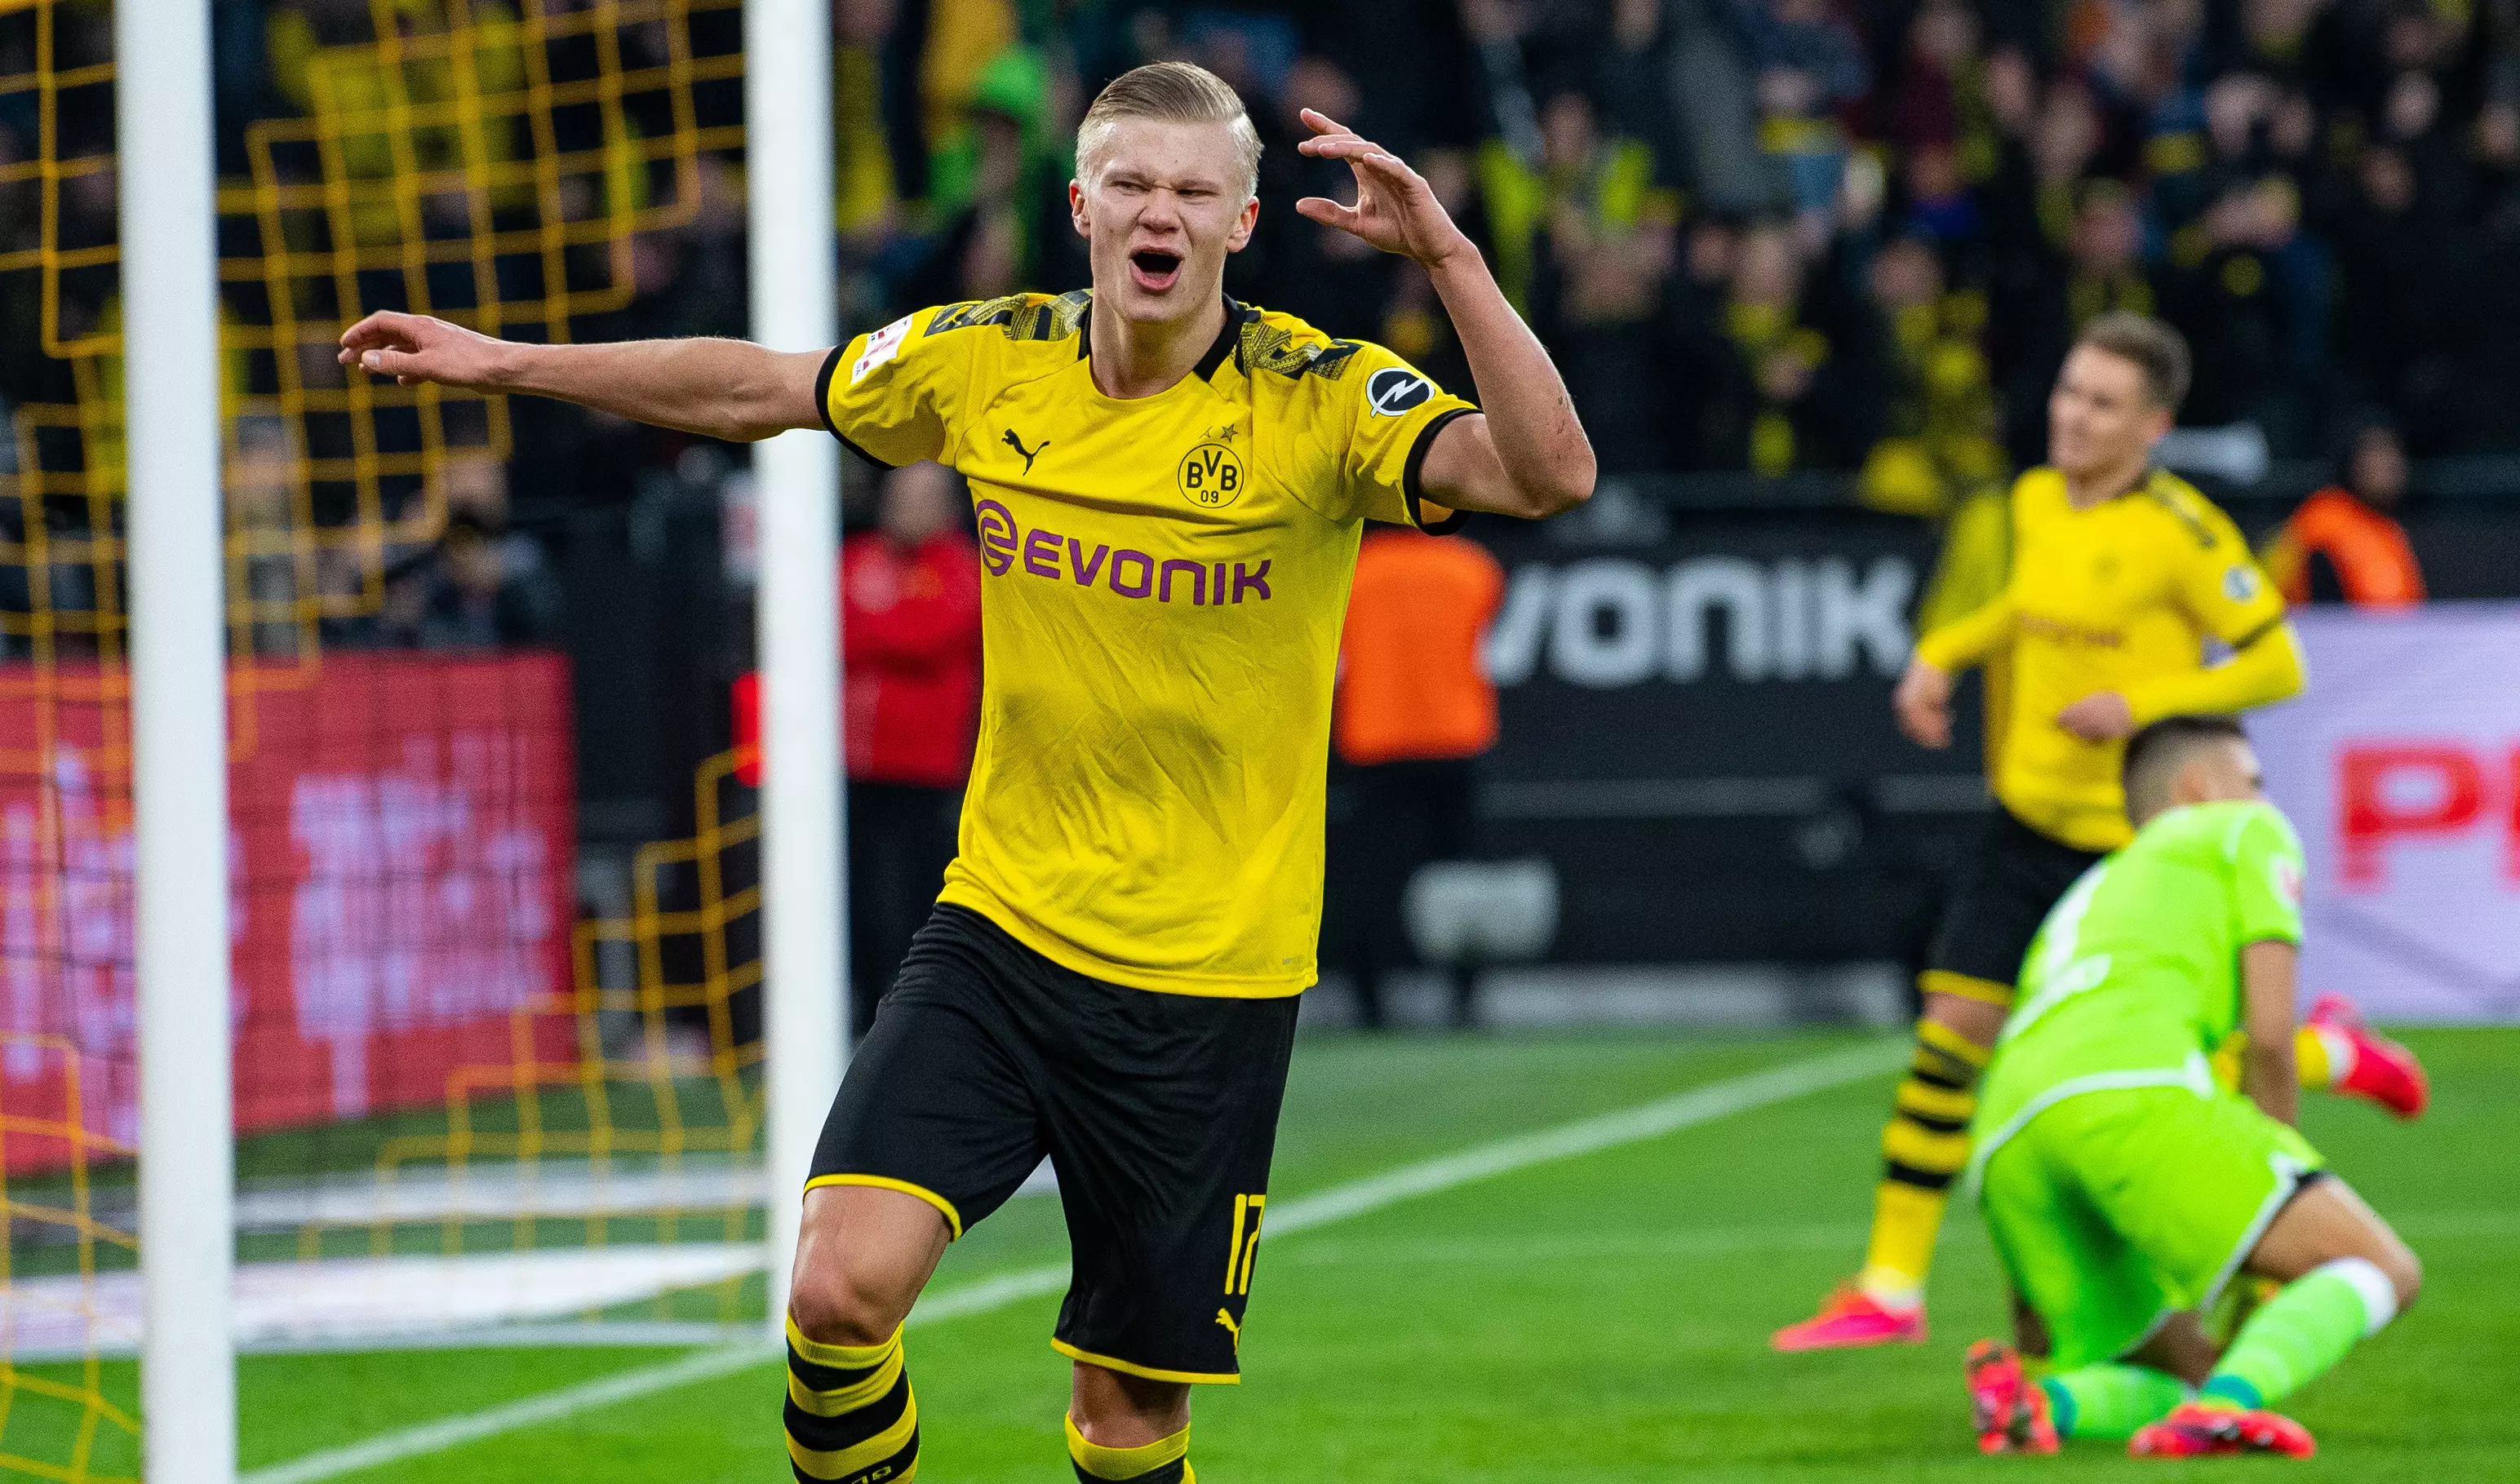 Haaland chose Dortmund over United in January. Image: PA Images